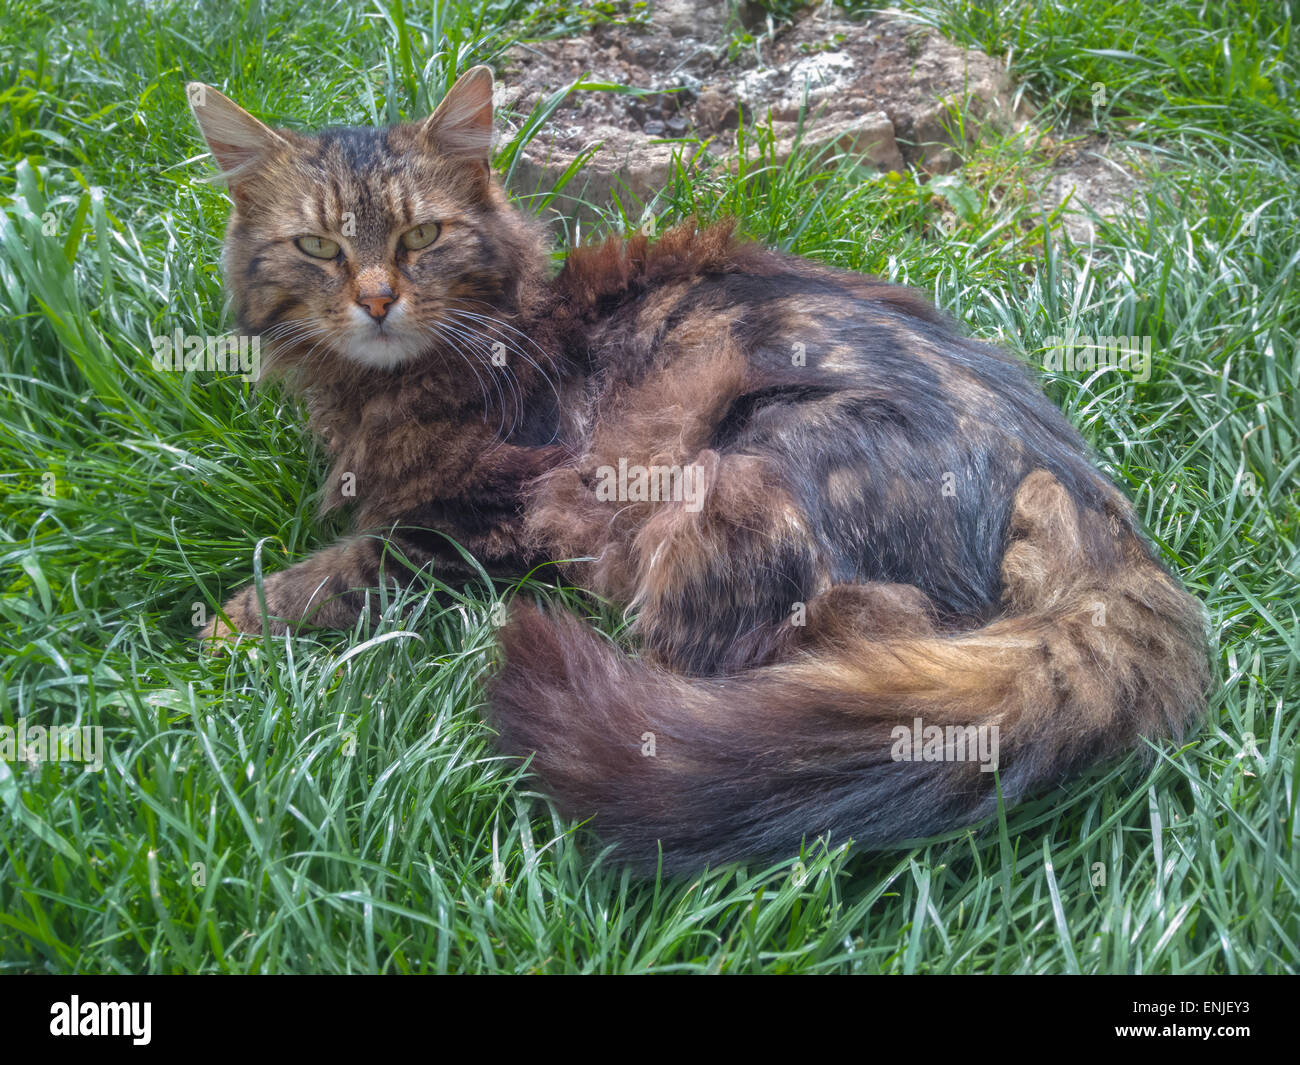 Cute cat in the Grass - eye contact Stock Photo